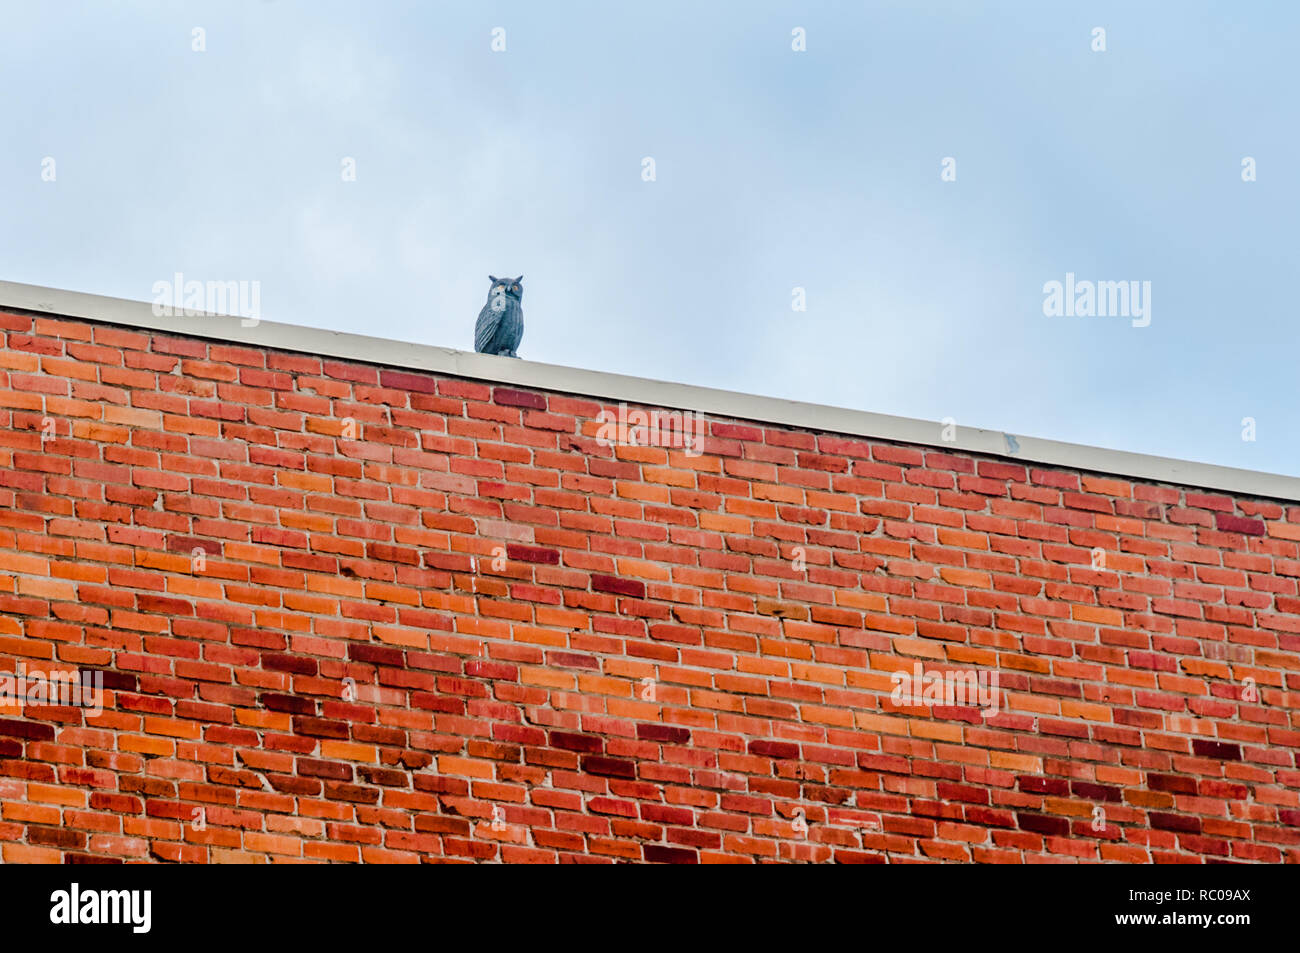 Owl looks realistic but mice need not worry: it's a fake owl on the roof of a tall brick building in Calgary, Alberta, Canada. Stock Photo